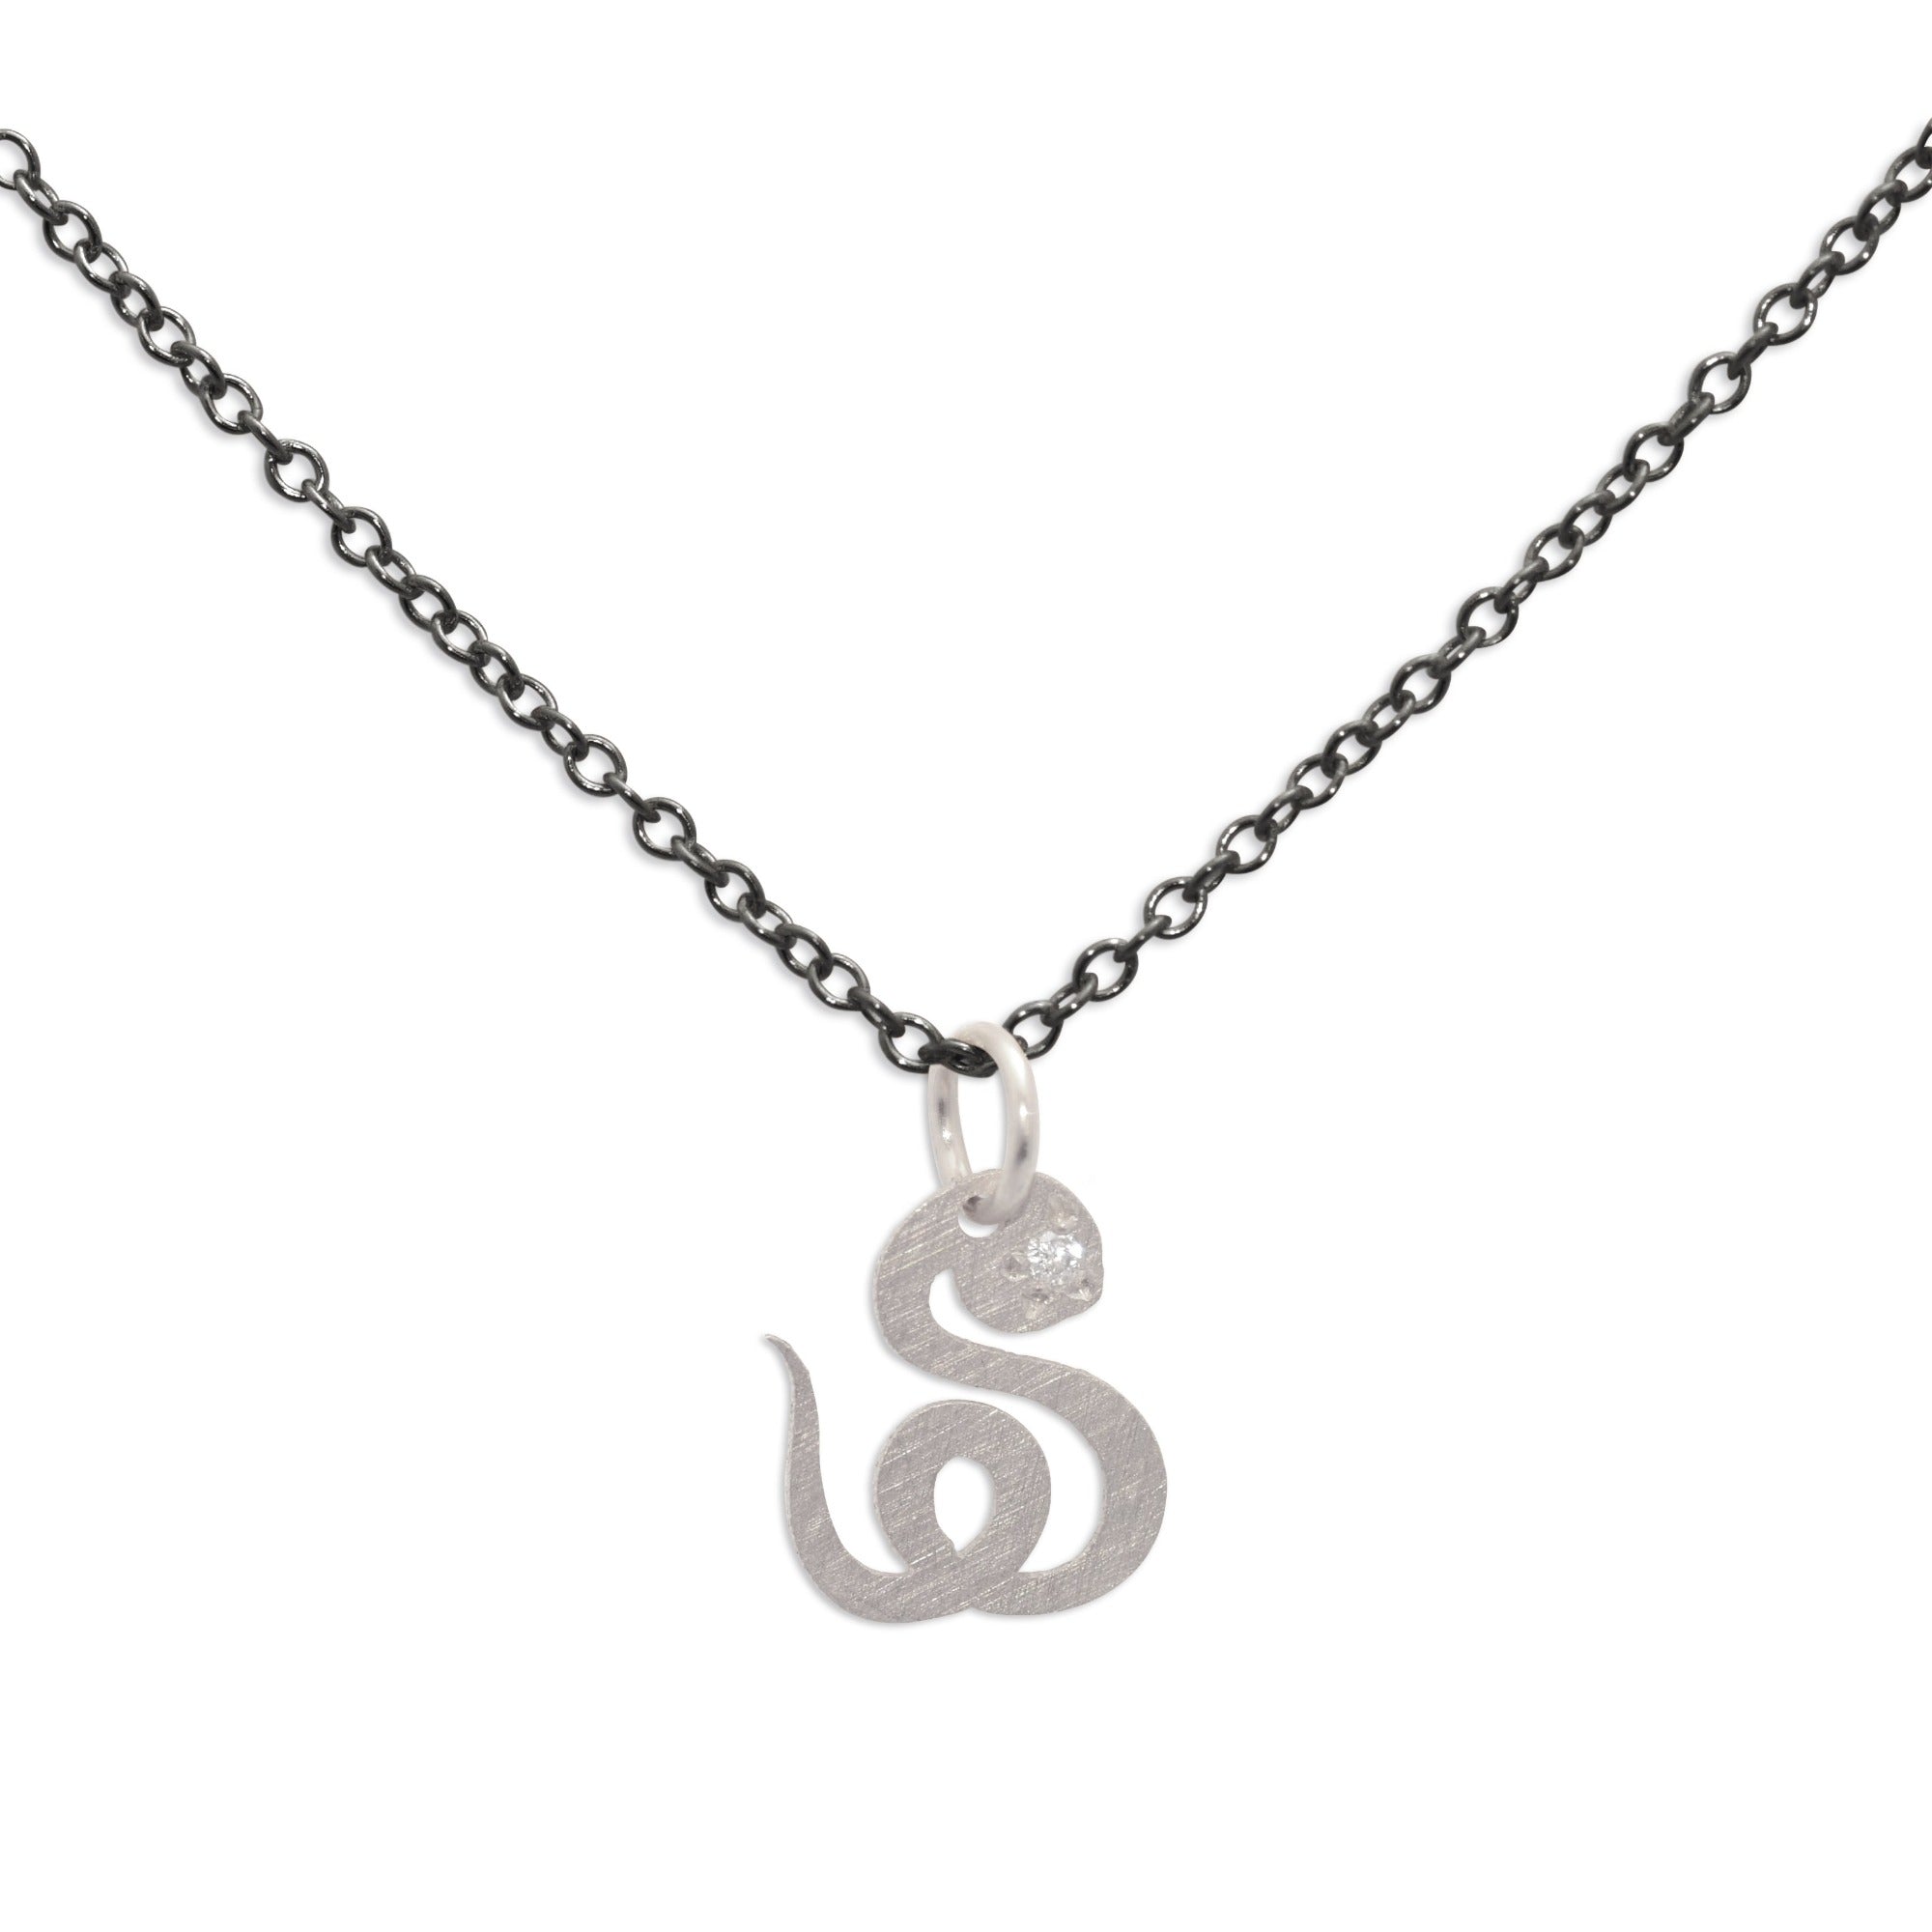 snake / sterling silver / oxidized silver chinese zodiac charms